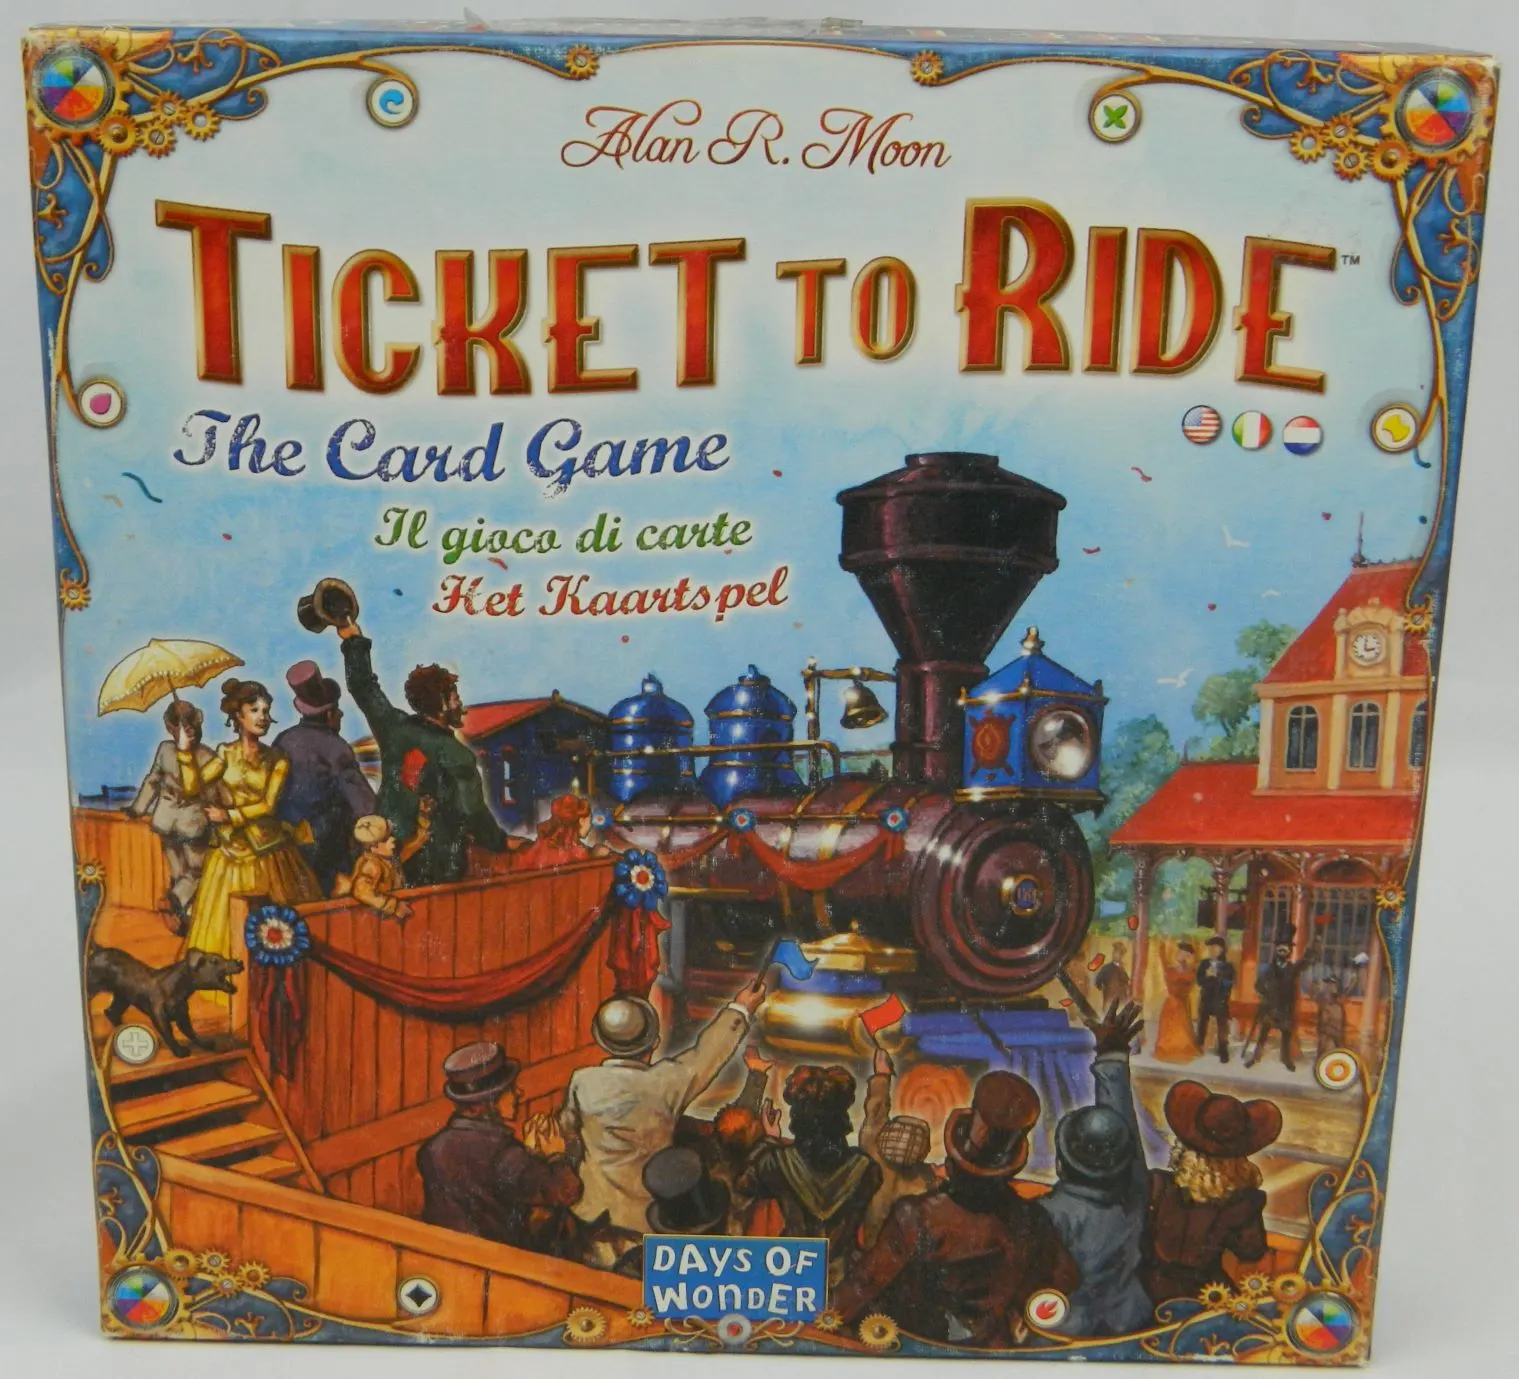 Box for Ticket to Ride Card Game